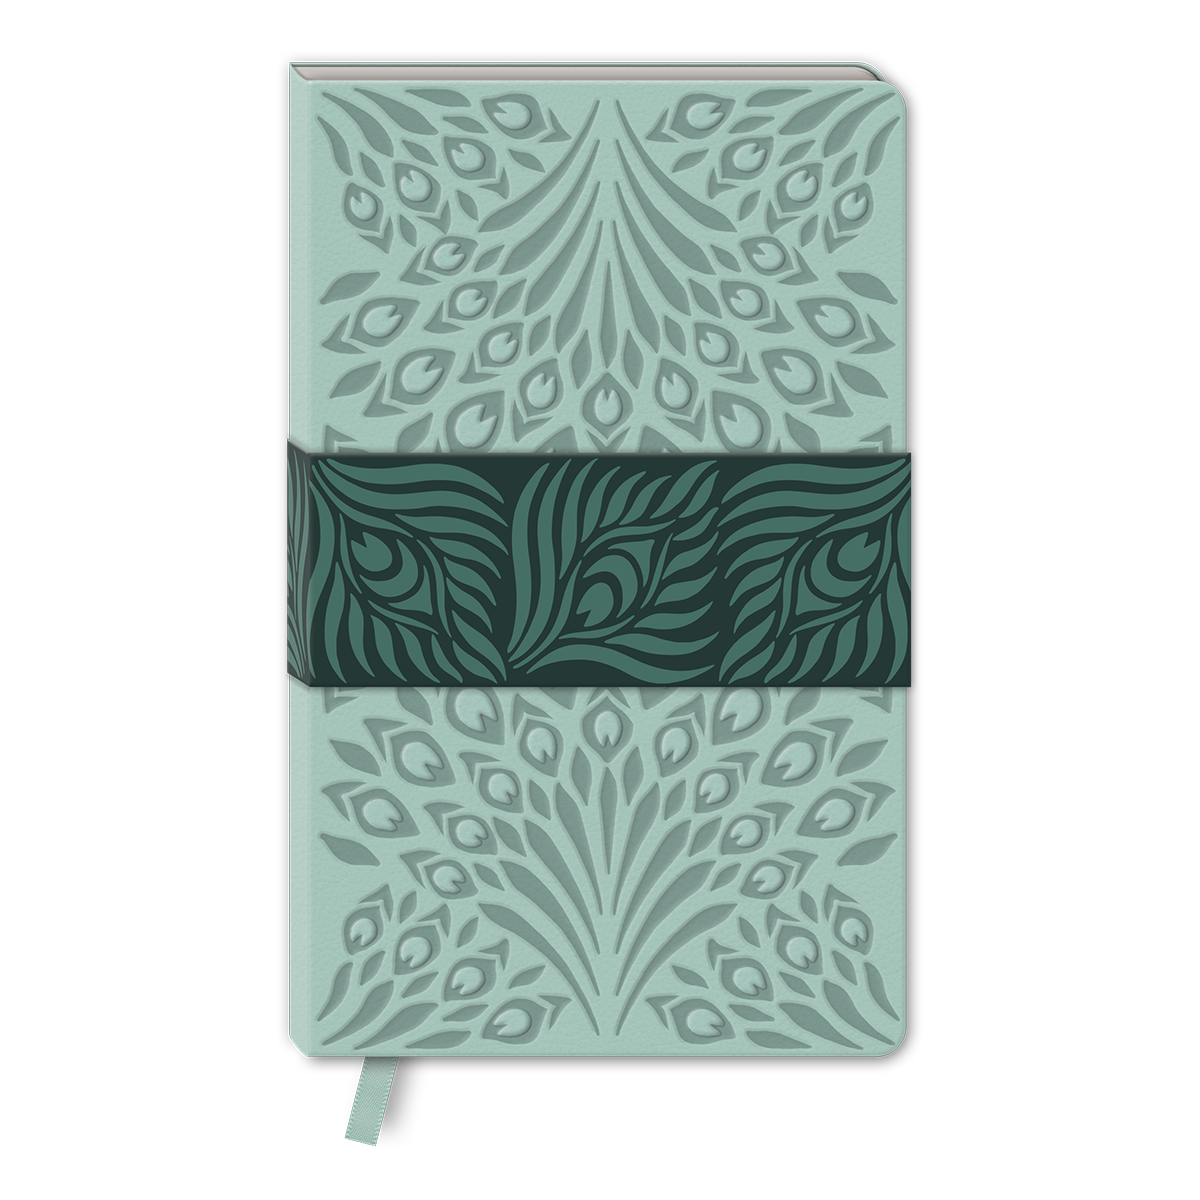 Nightshade Peacock Fan Softcover Journal Product